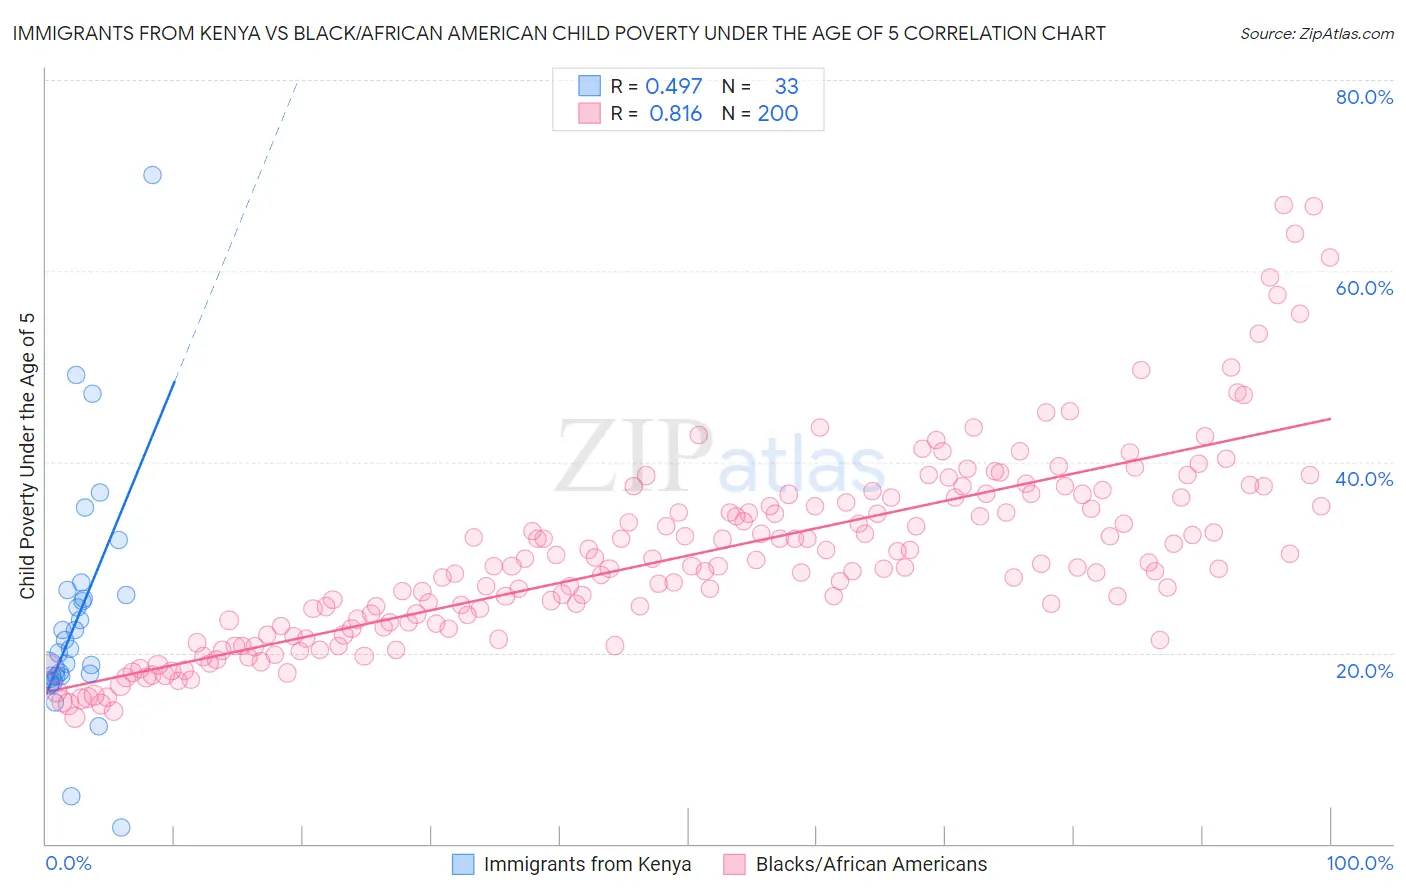 Immigrants from Kenya vs Black/African American Child Poverty Under the Age of 5